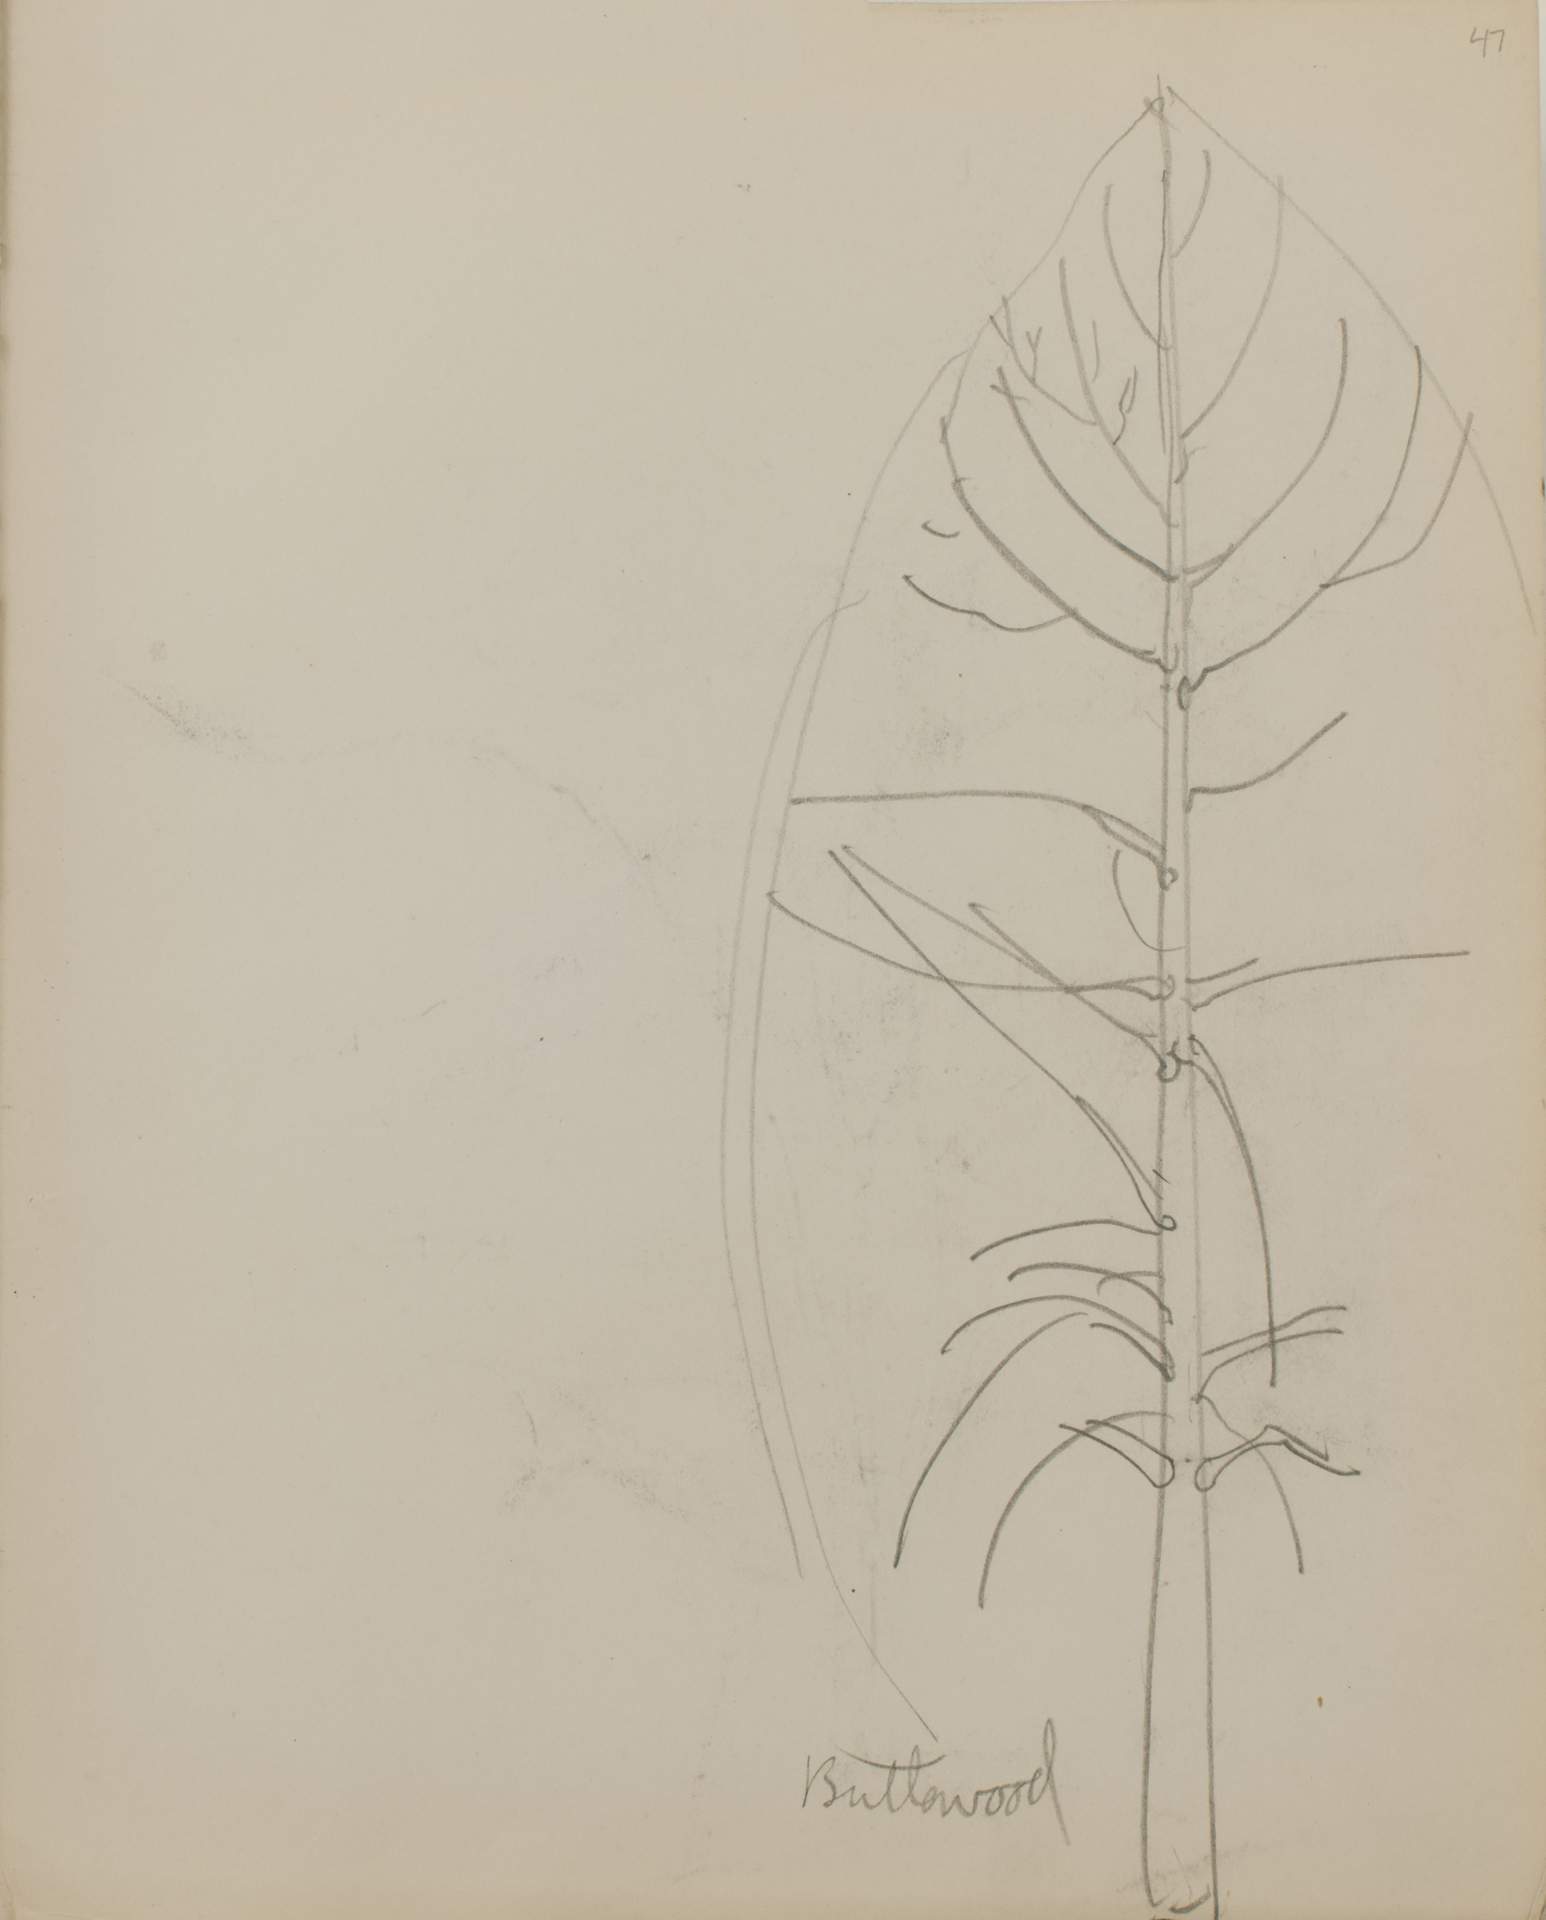 Untitled (sketch of buttonwood tree)